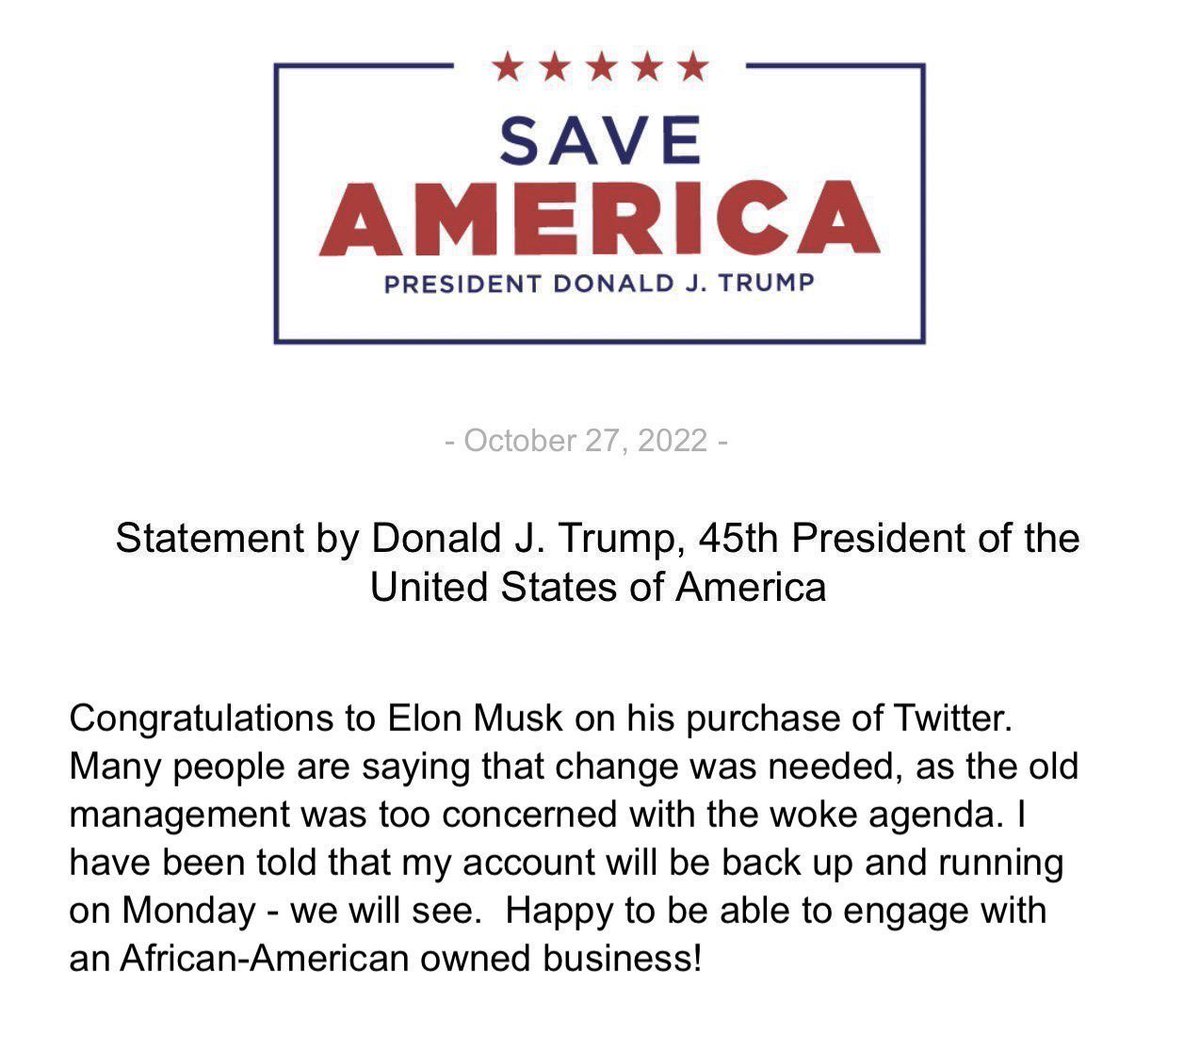 While this is an amazingly funny press release, it’s fake. Trump didn’t release this.